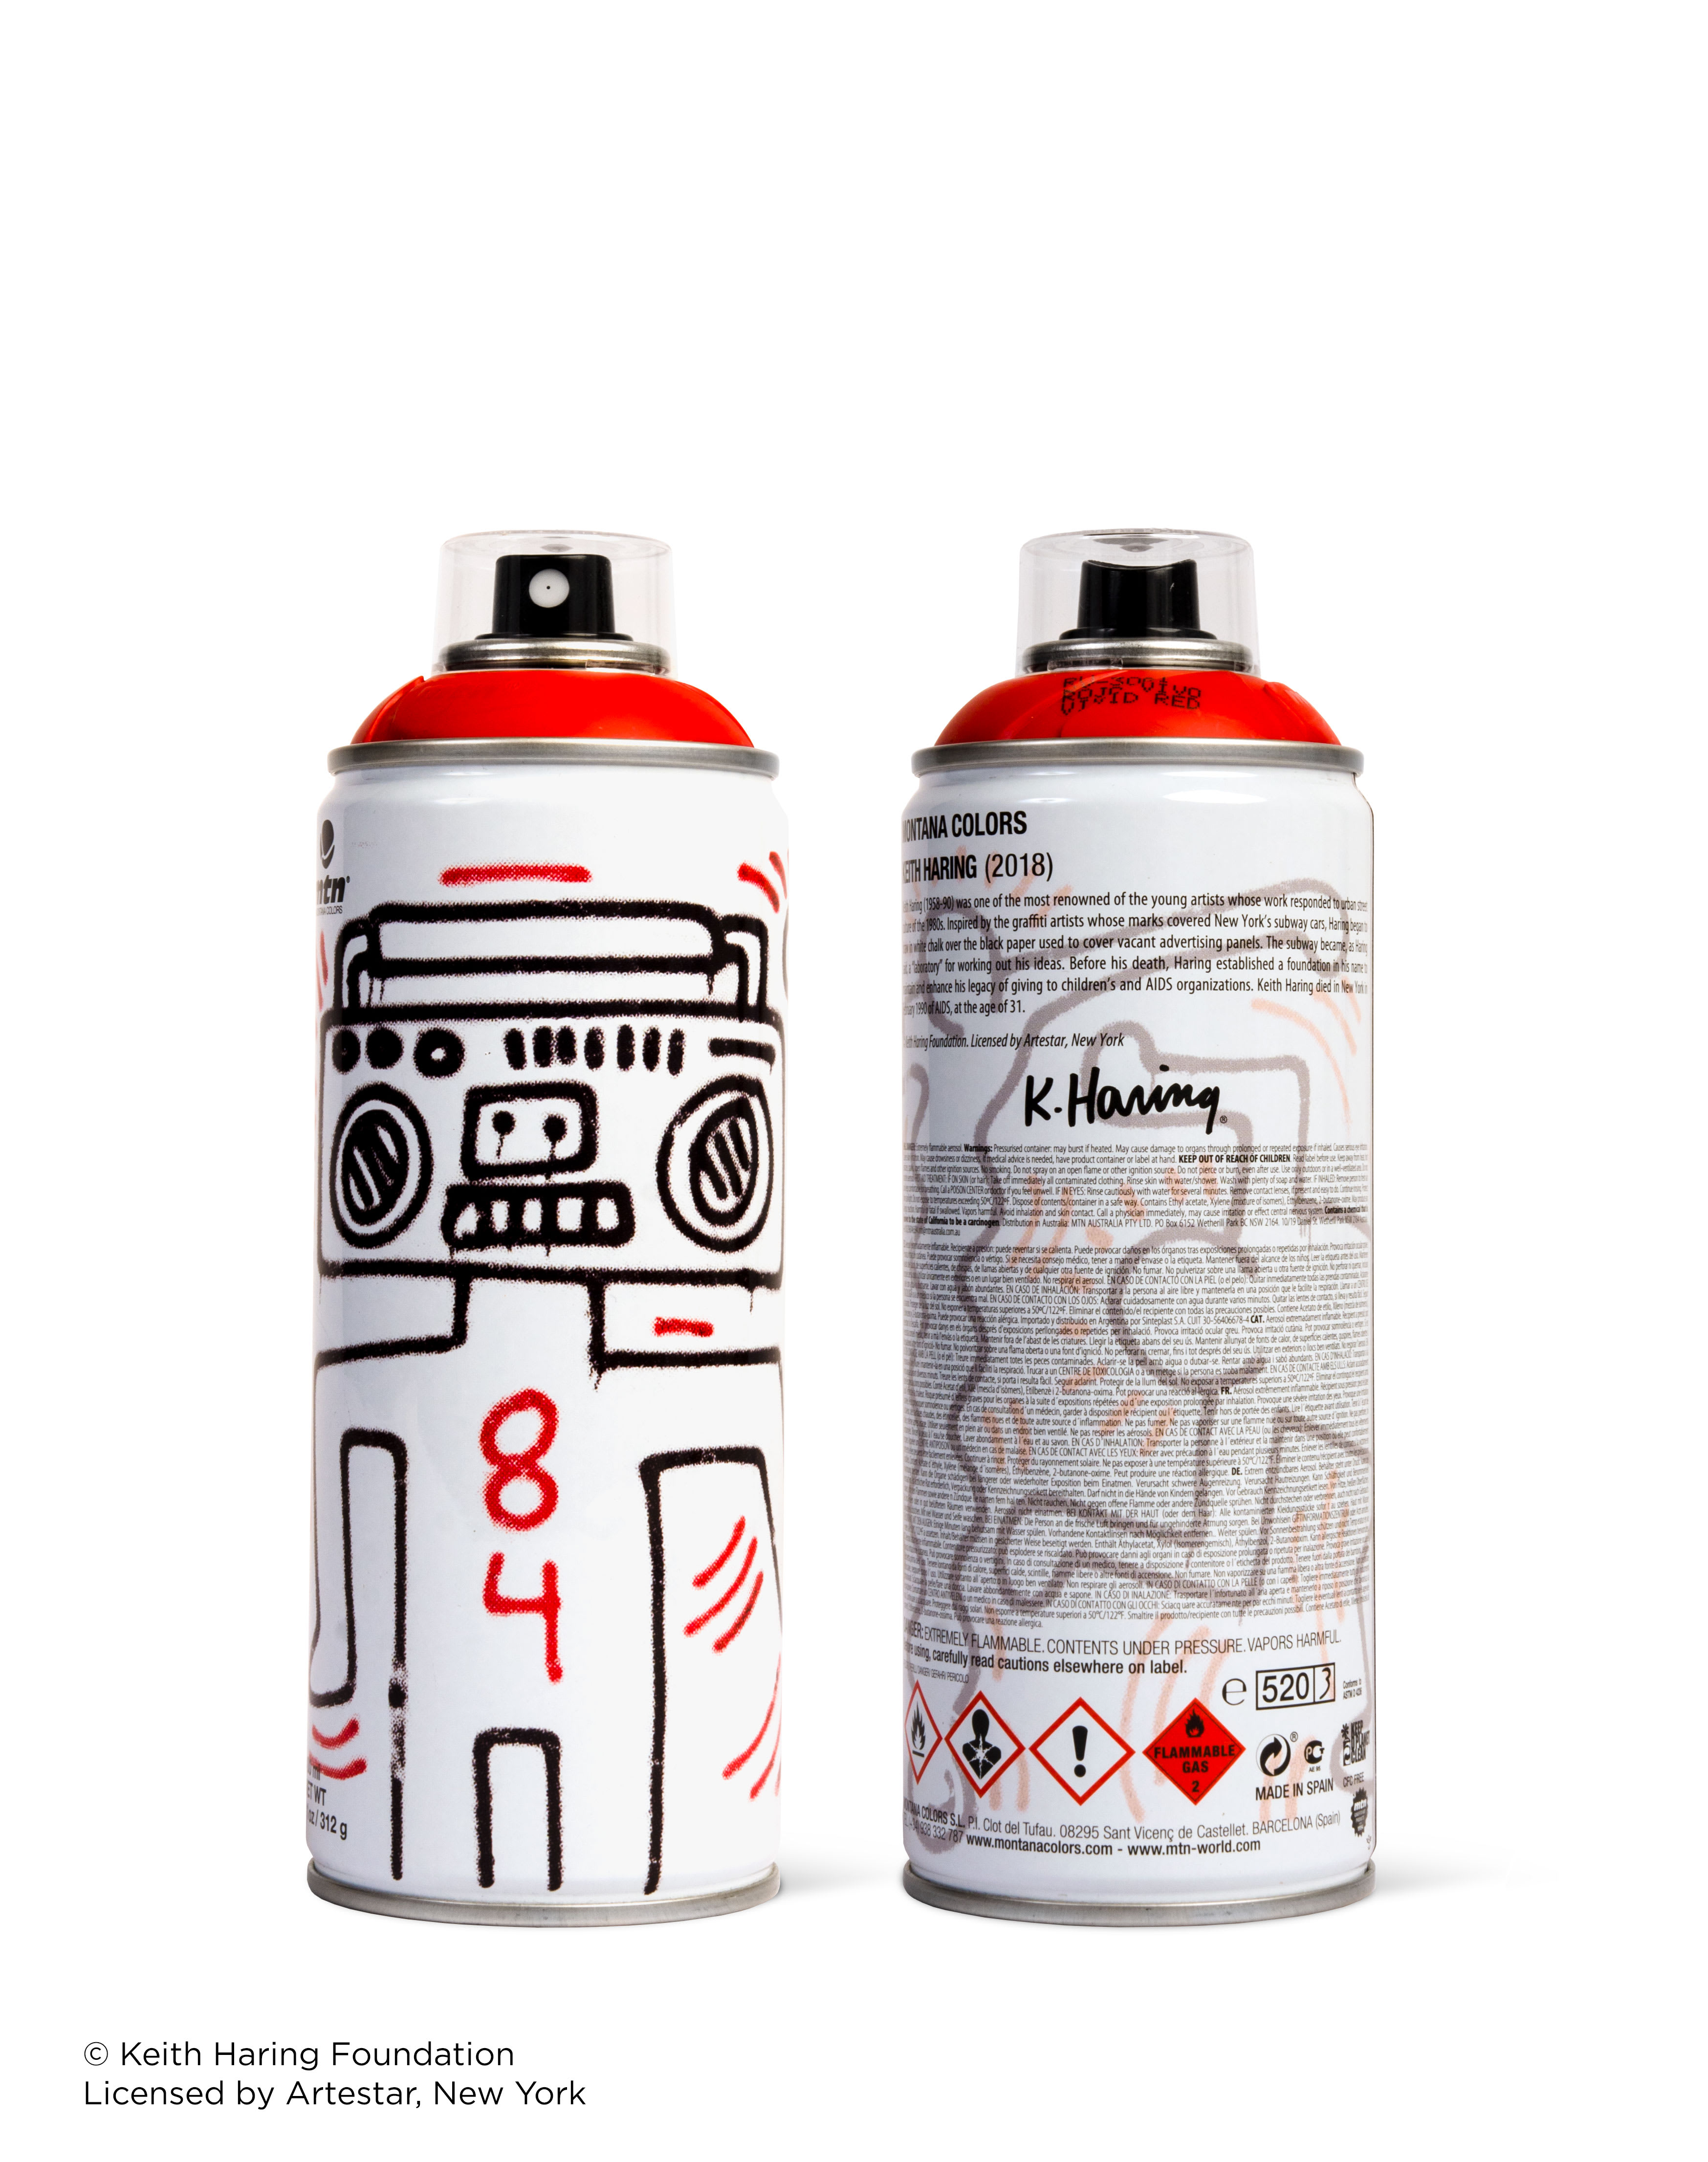 Red Keith Haring spray paint can for Beyond The Streets.